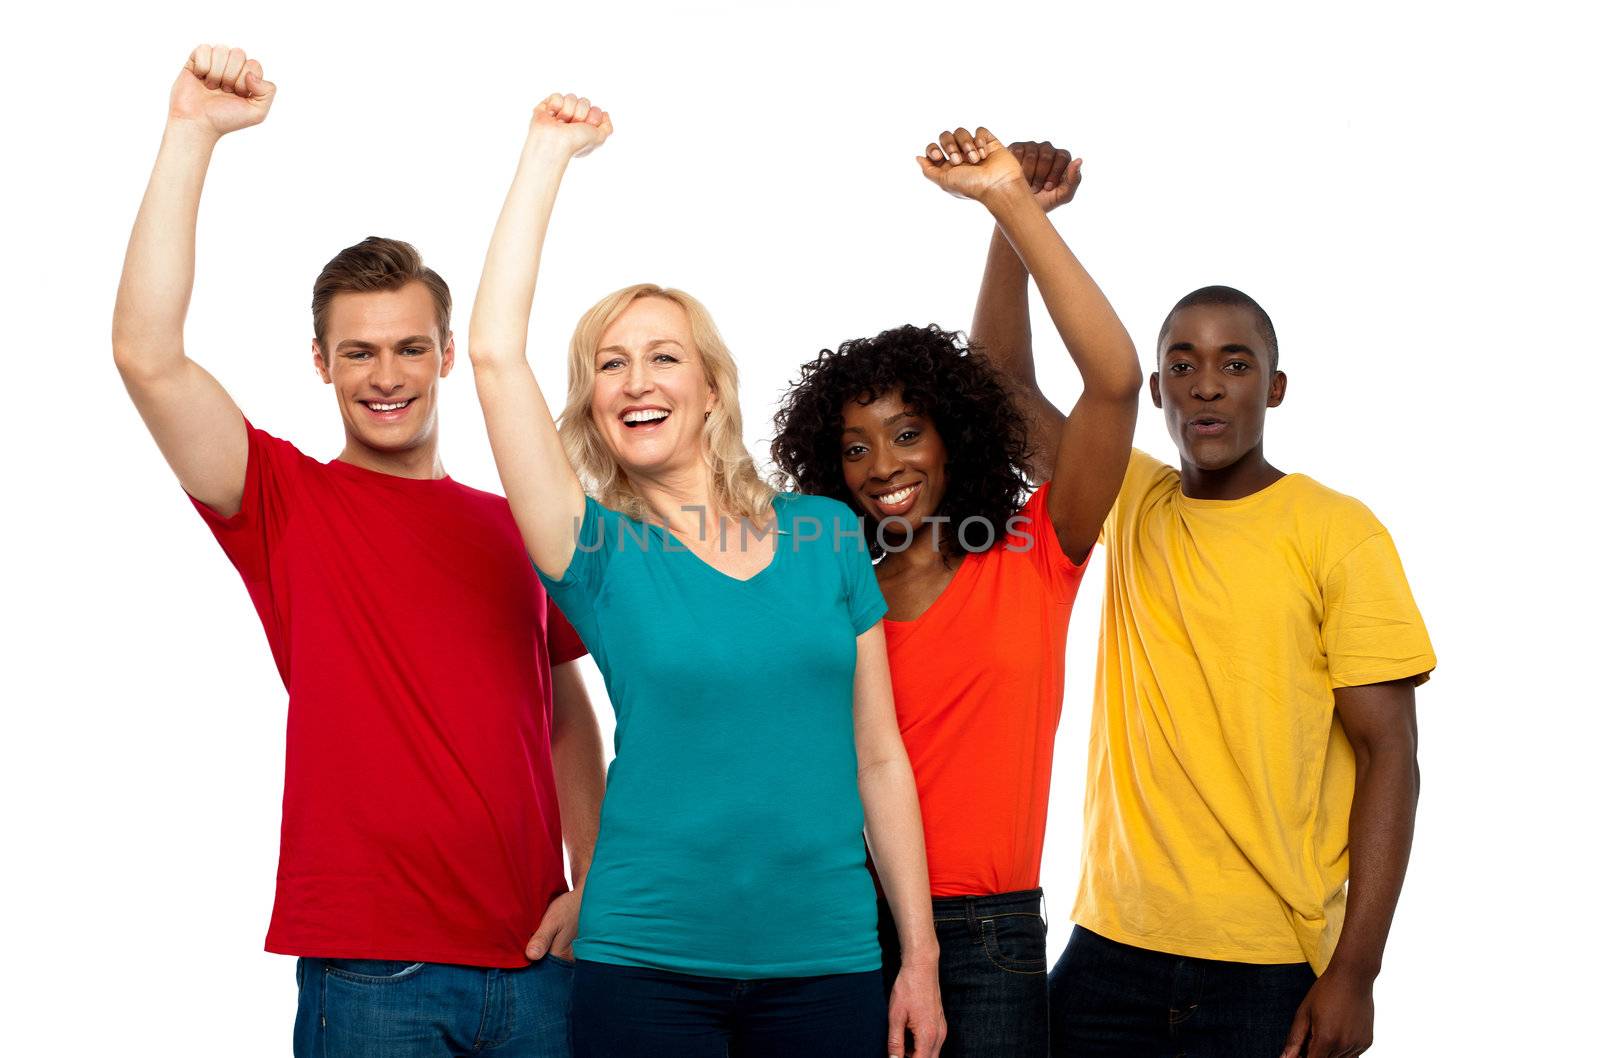 Excited teenager group posing with raised arms and looking at camera